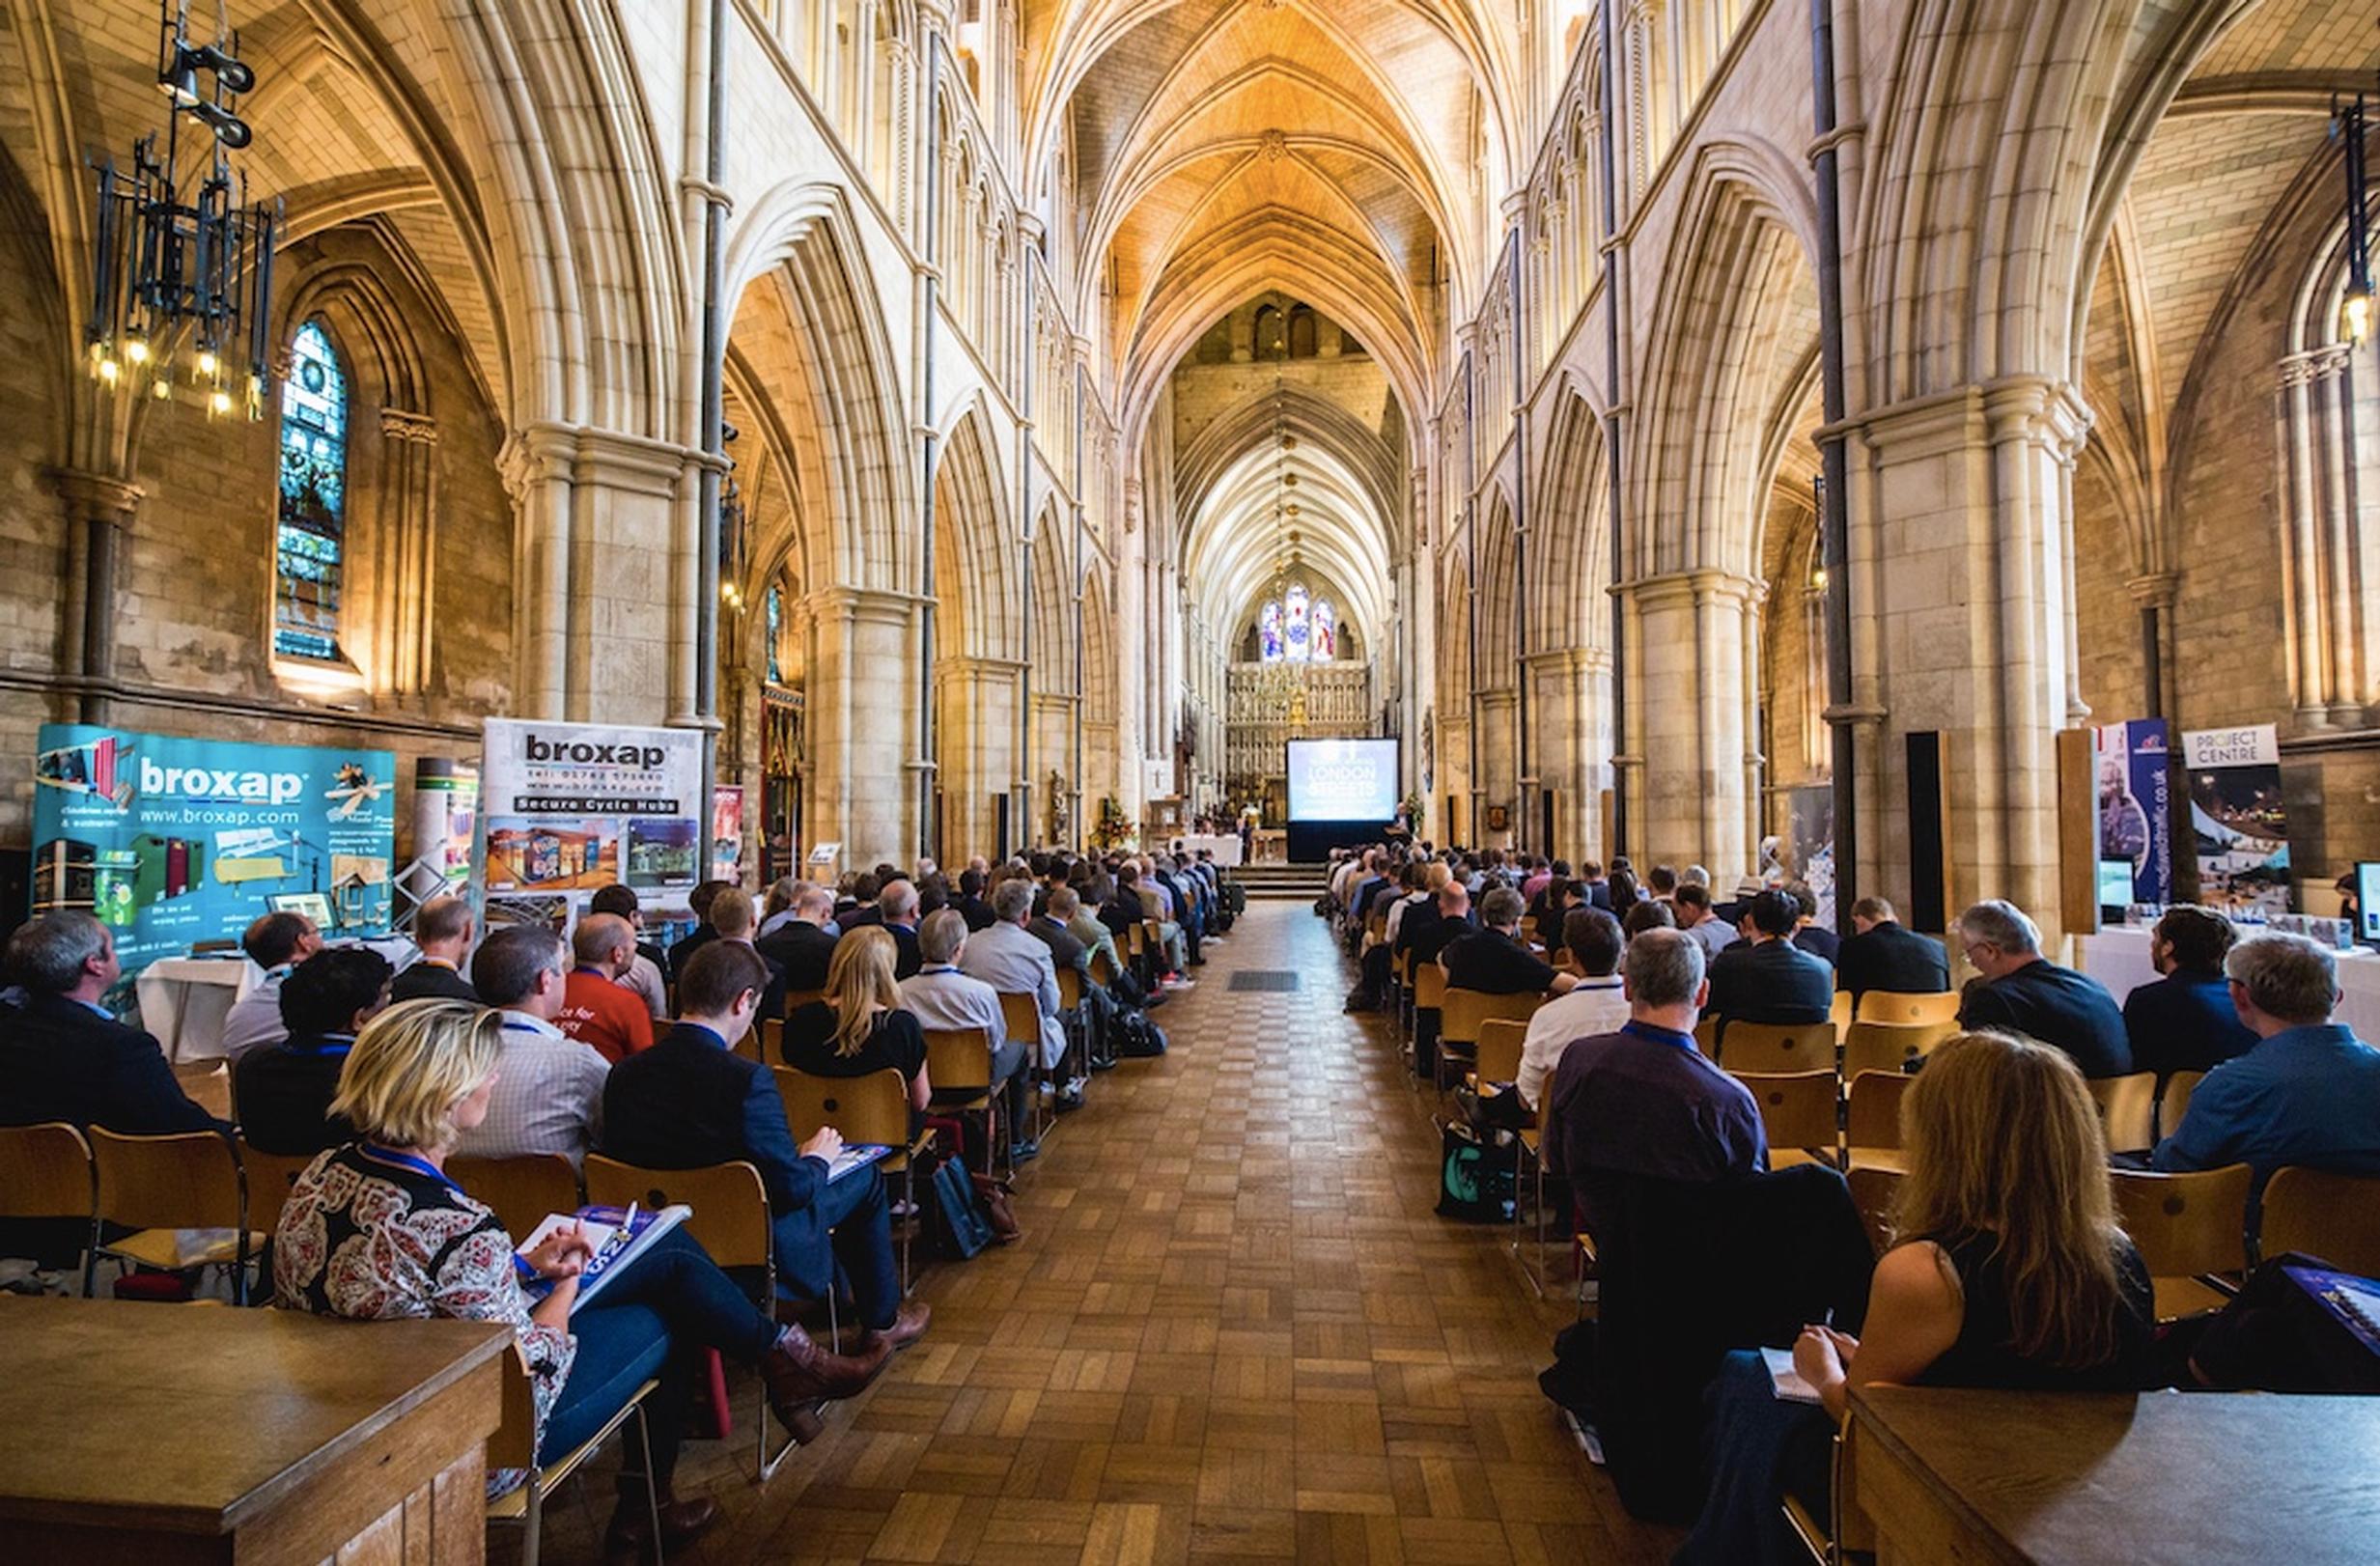 The opening plenary at the imposing Southwark Cathedral